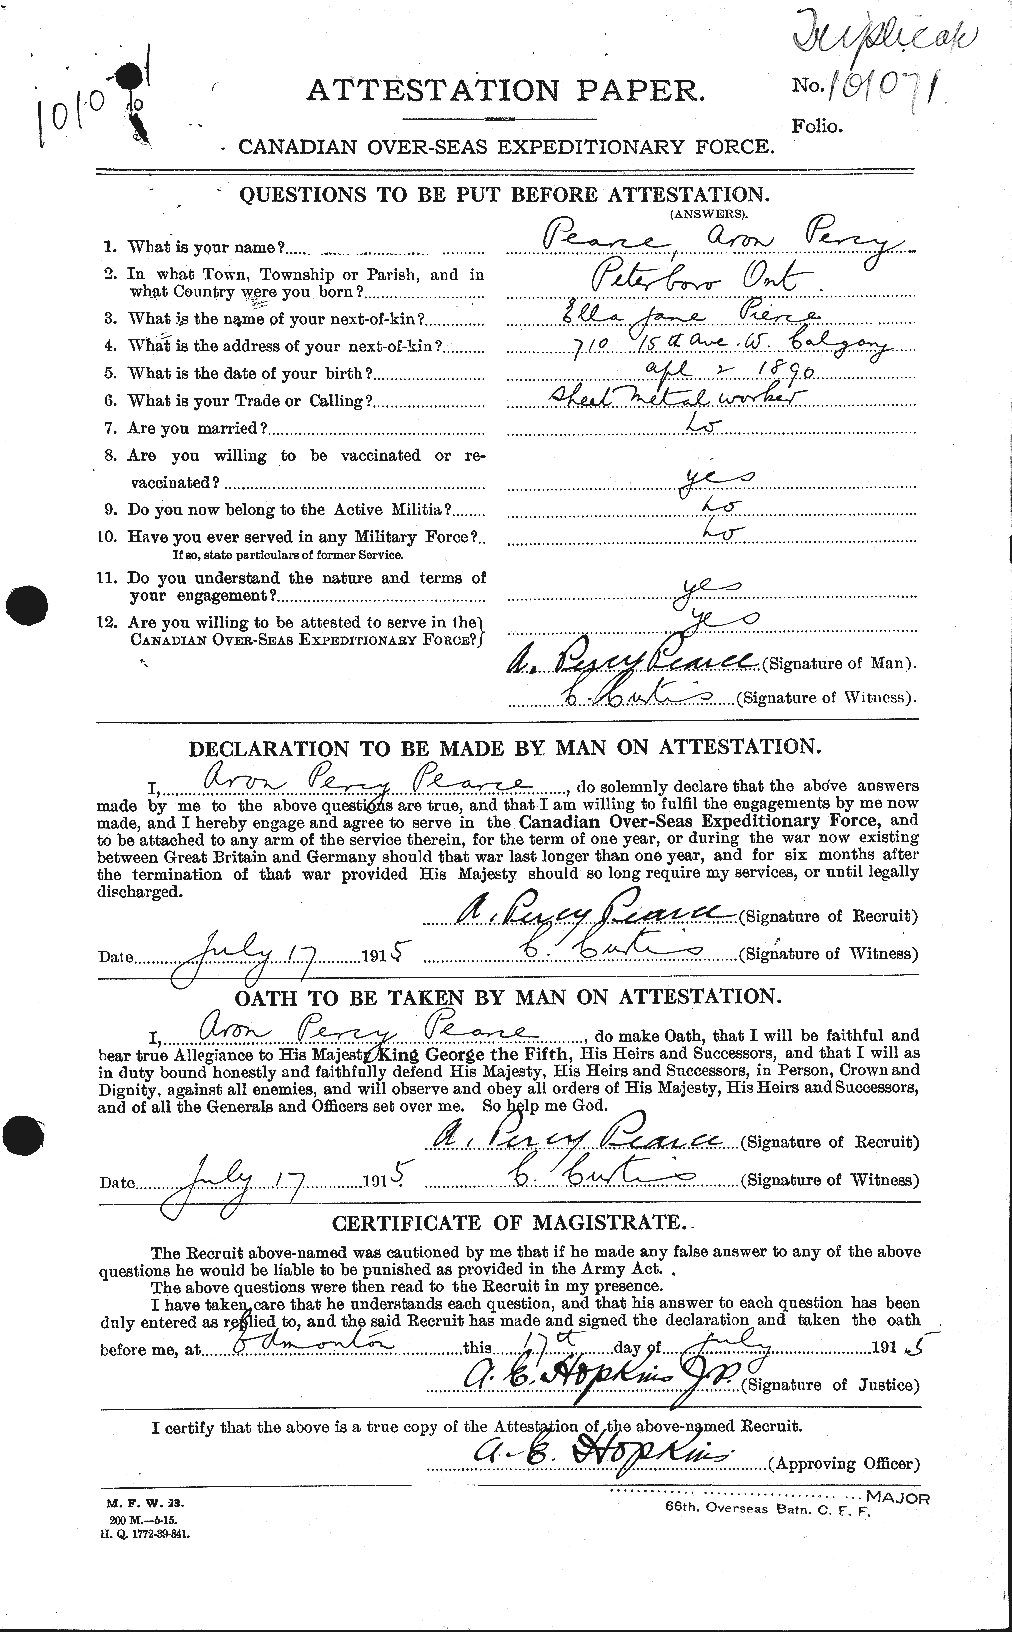 Personnel Records of the First World War - CEF 570534a